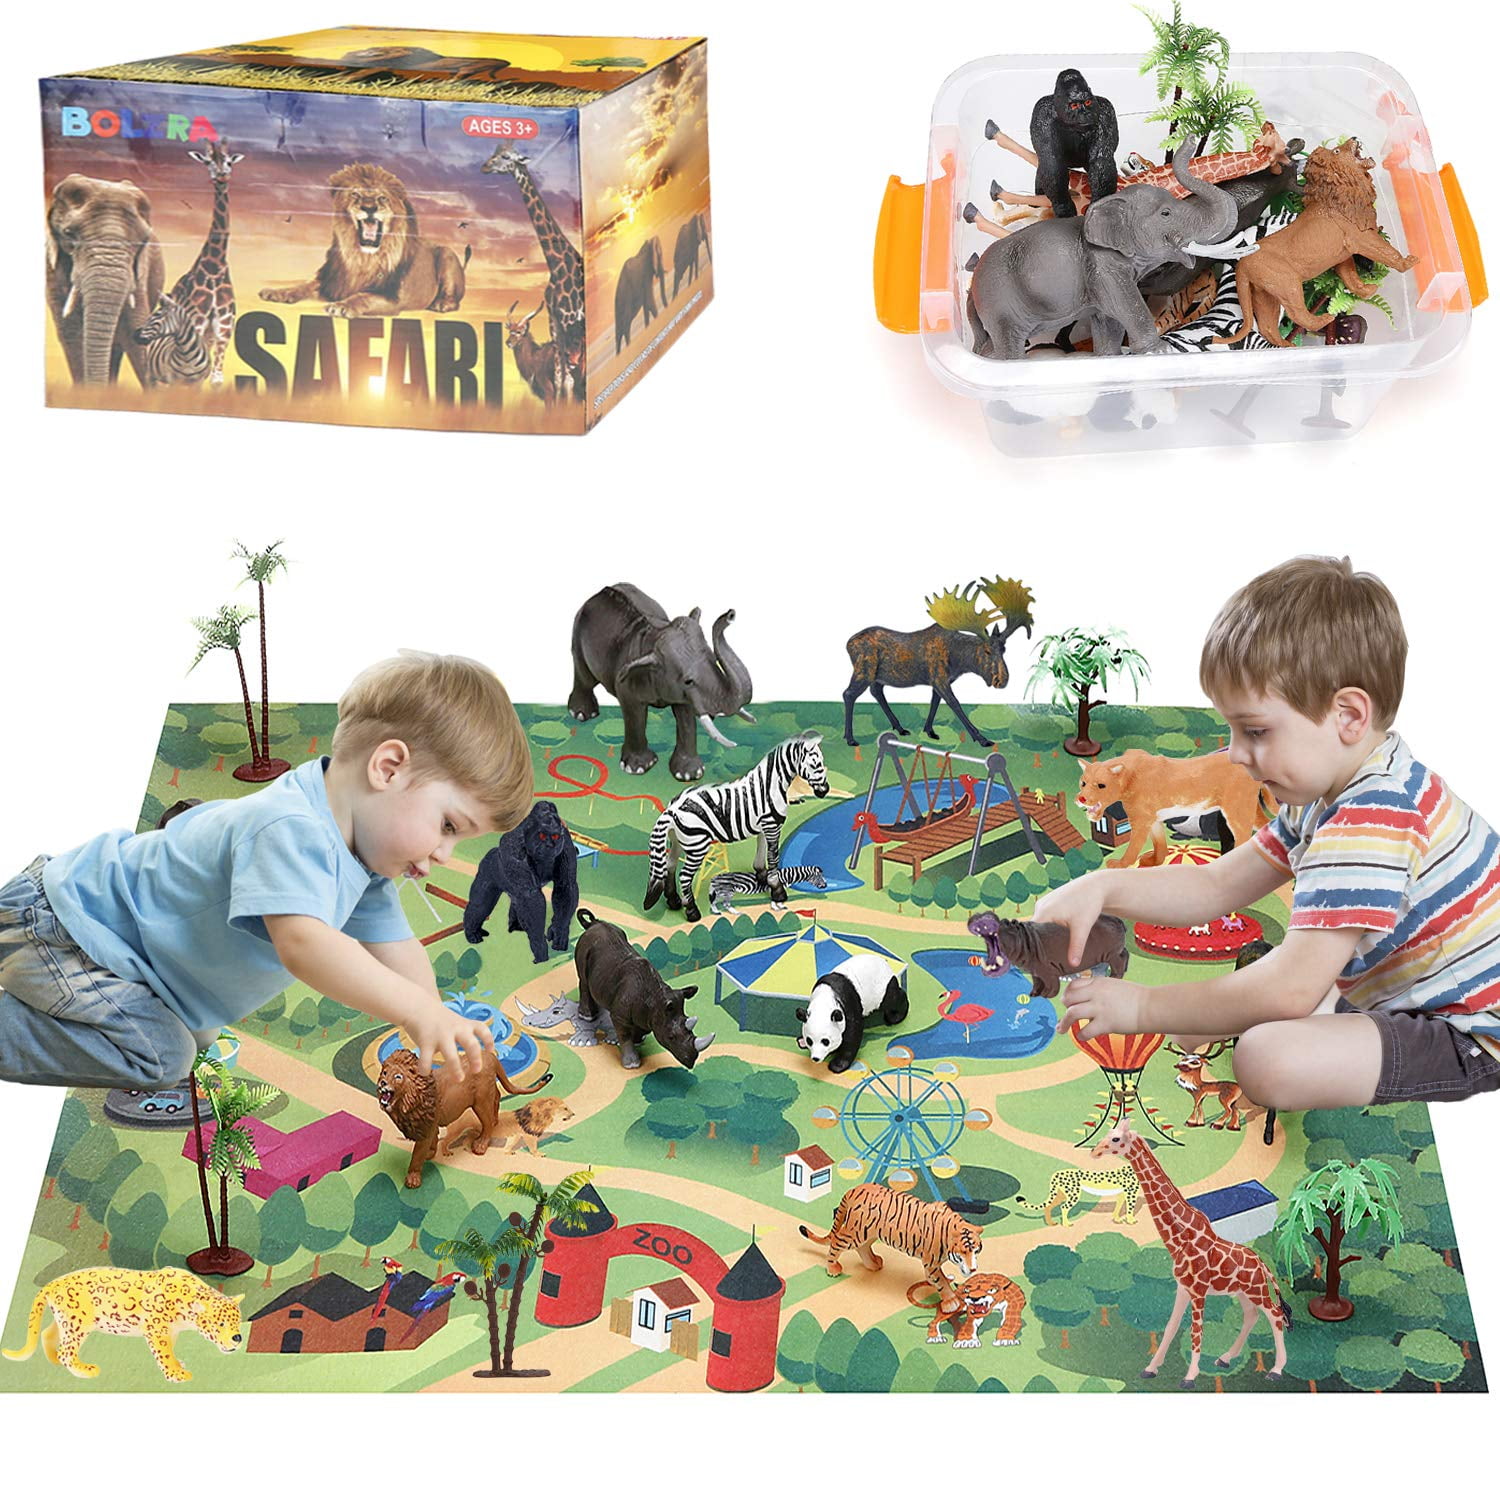 Panda，Gift for Kids Realistic Plastic Jungle Wild Zoo Animals Figures Playset with Elephant Lion GiftInTheBox Safari Animals Figurines Toys with Activity Play Mat Boys Giraffe 